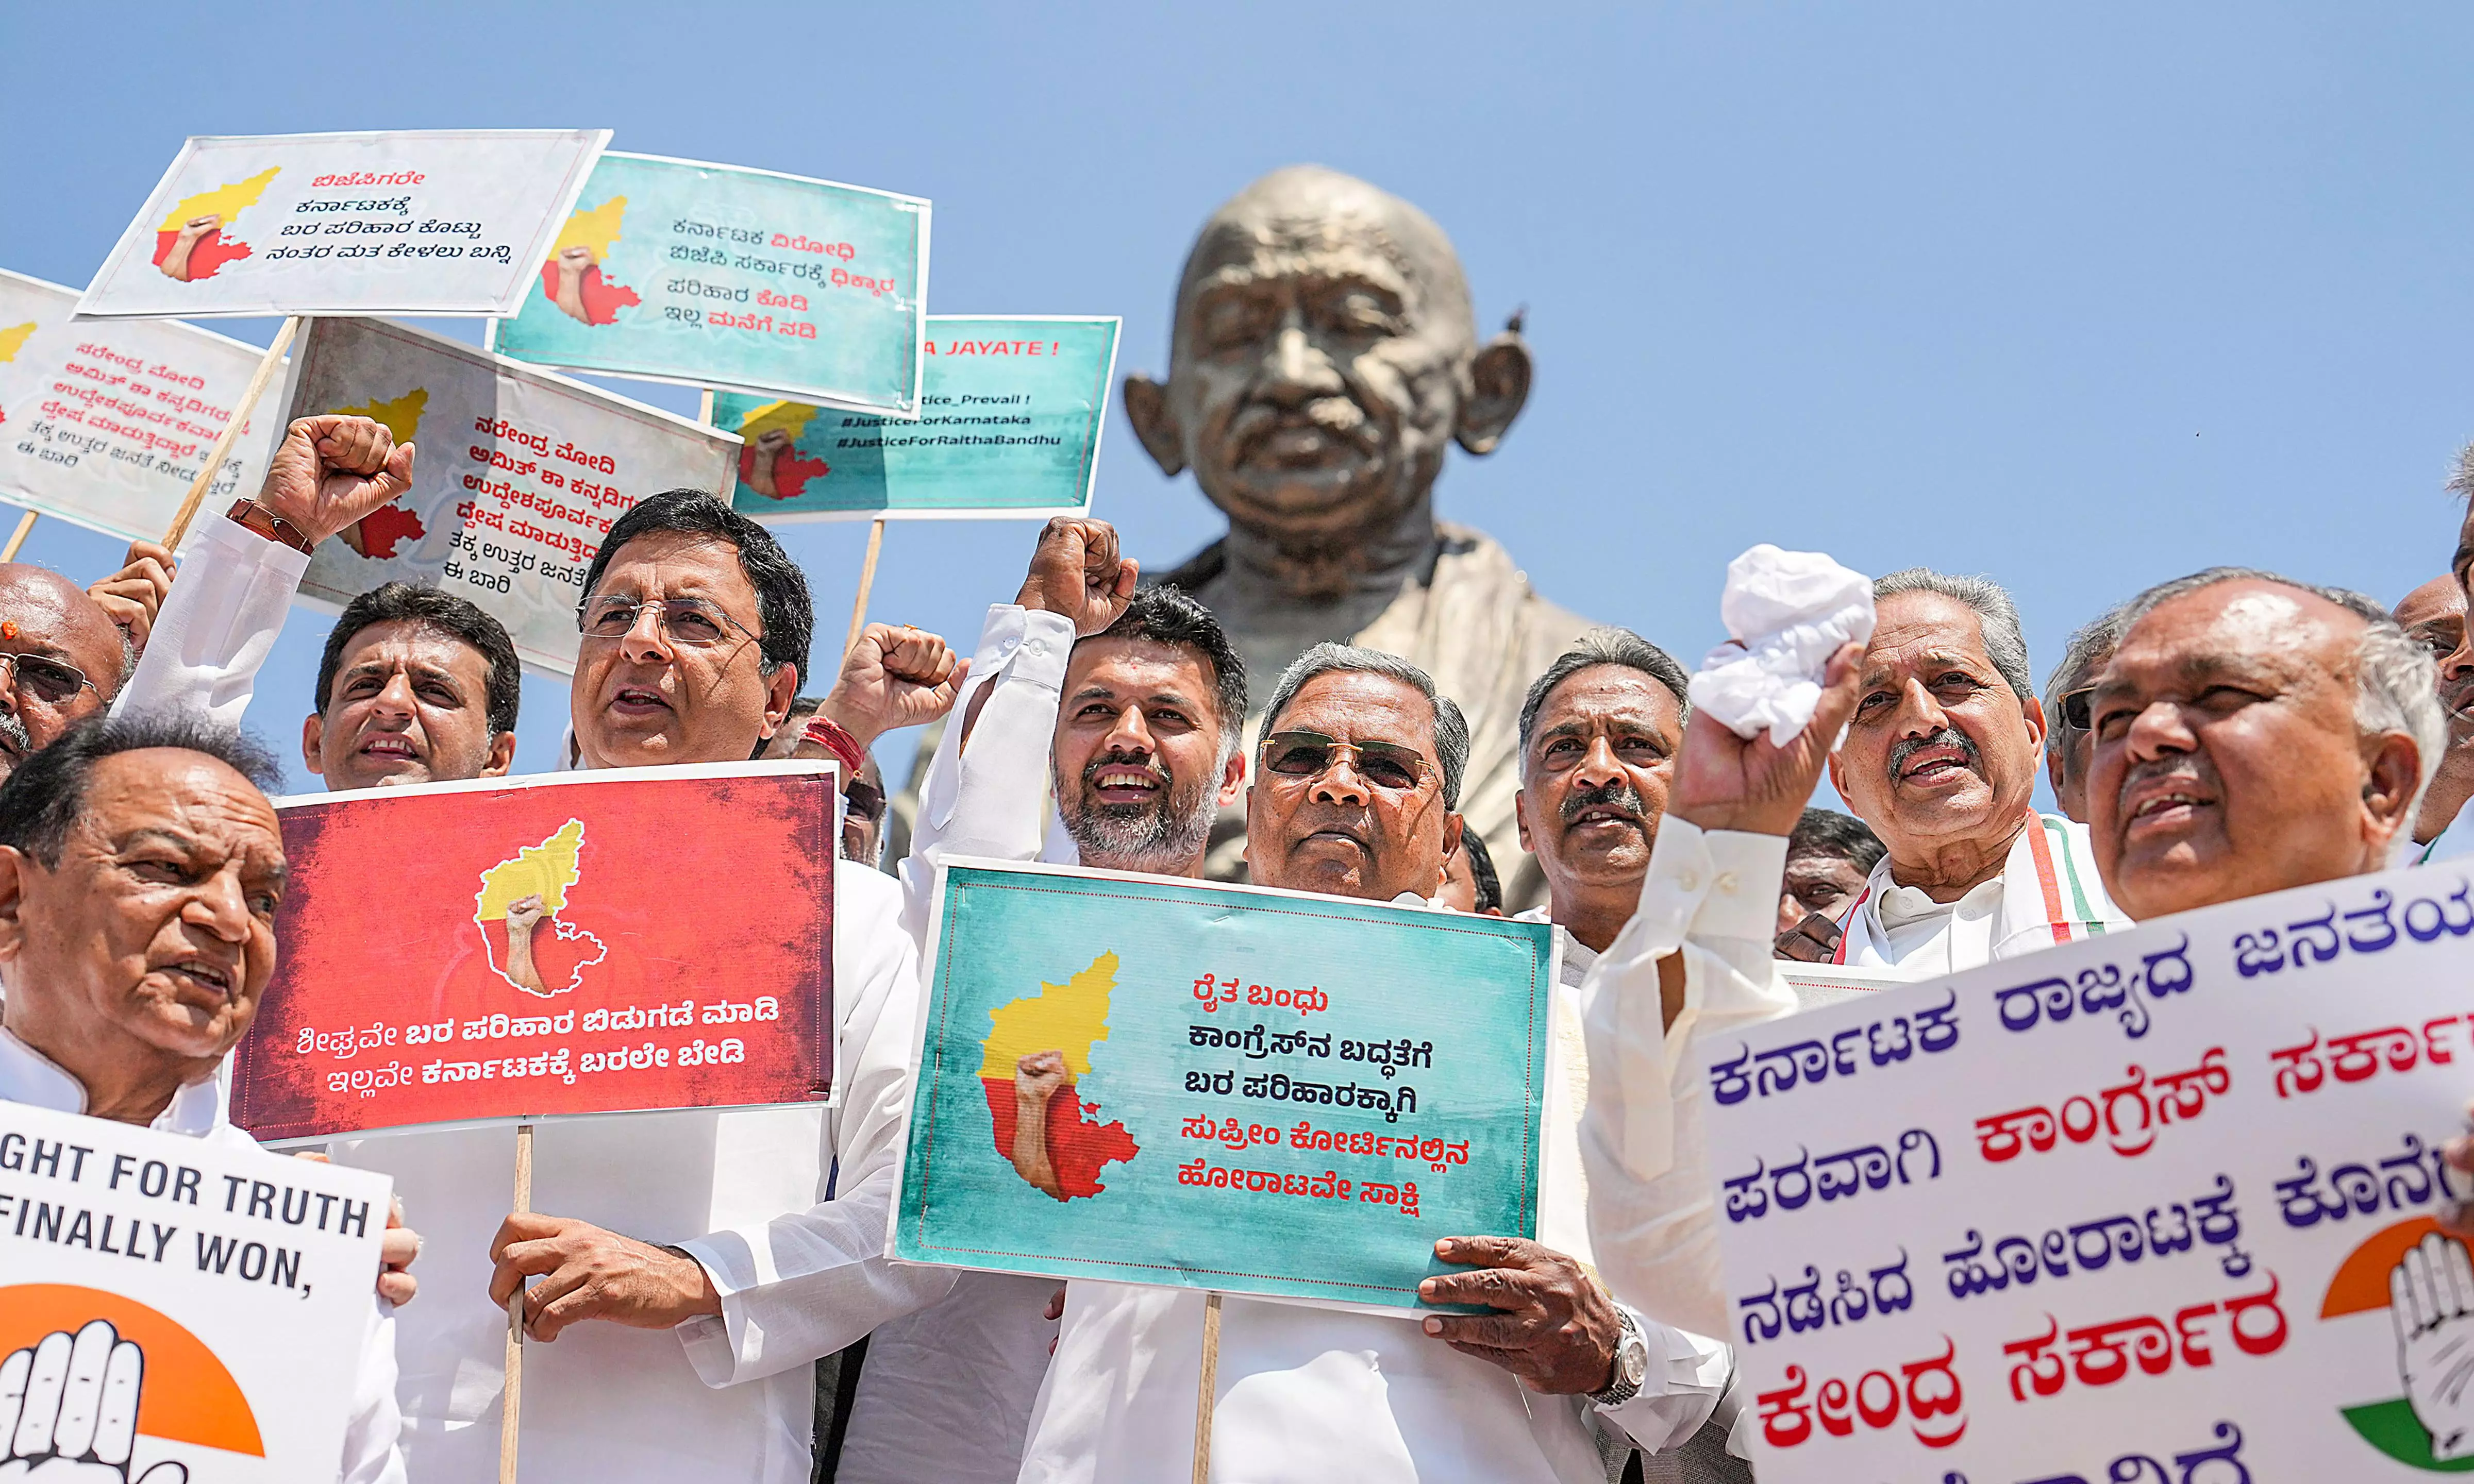 Karnataka CM stages dharna for delayed release of drought relief funds by Centre